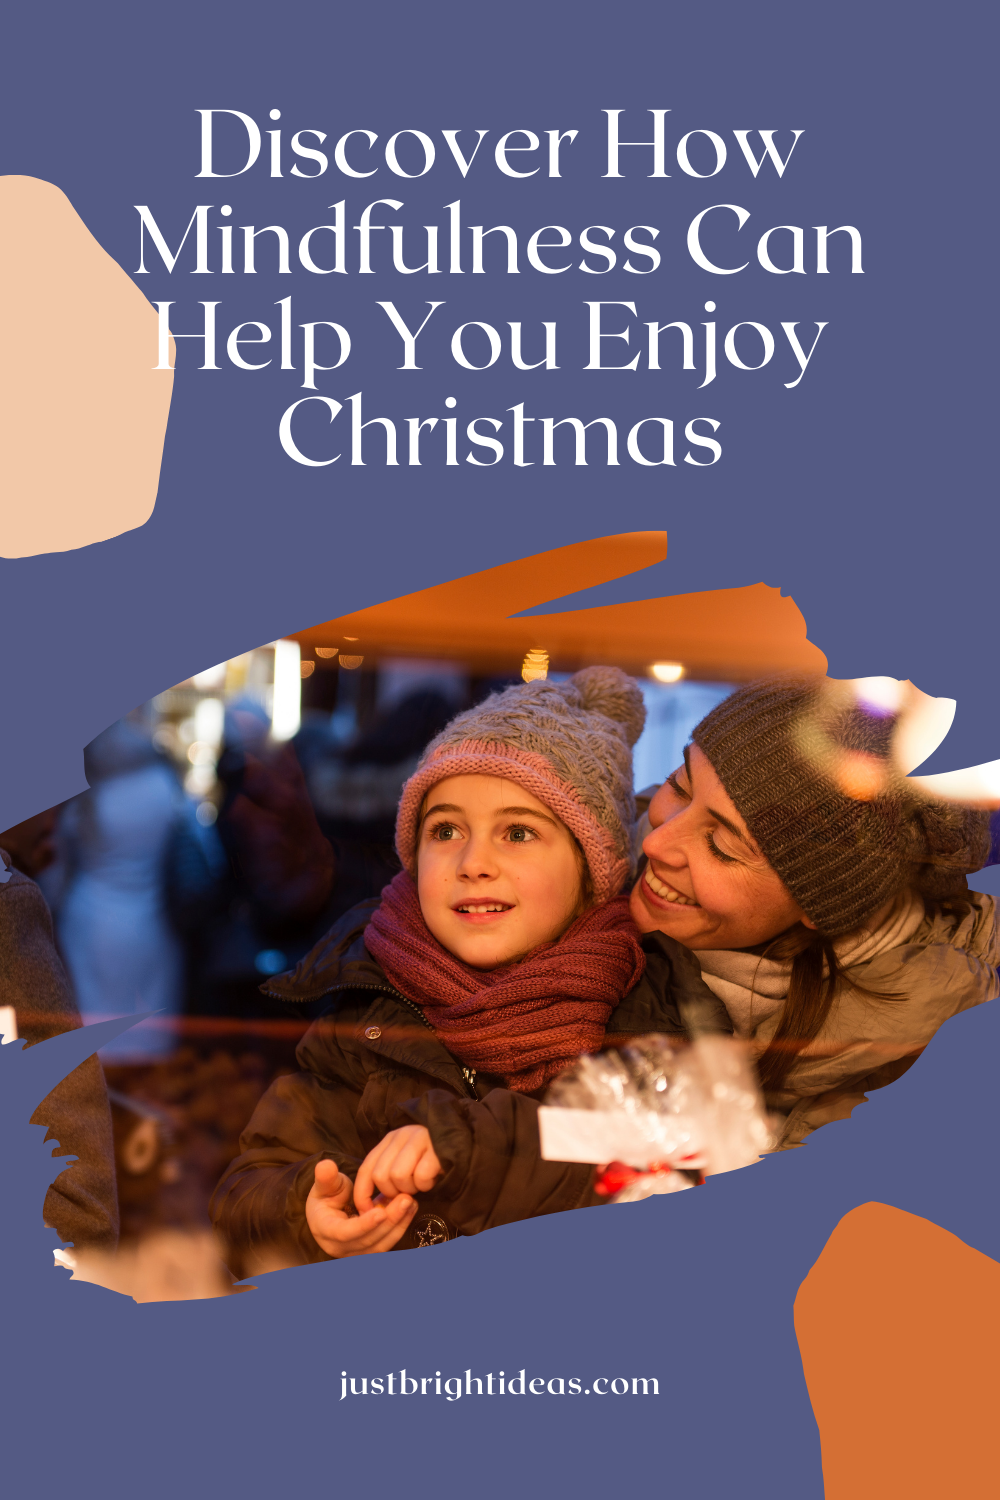 The Holidays can be so chaotic and stressful, so find out how mindfulness can help you have a happier Christmas making memories to be grateful for. #mindfulness